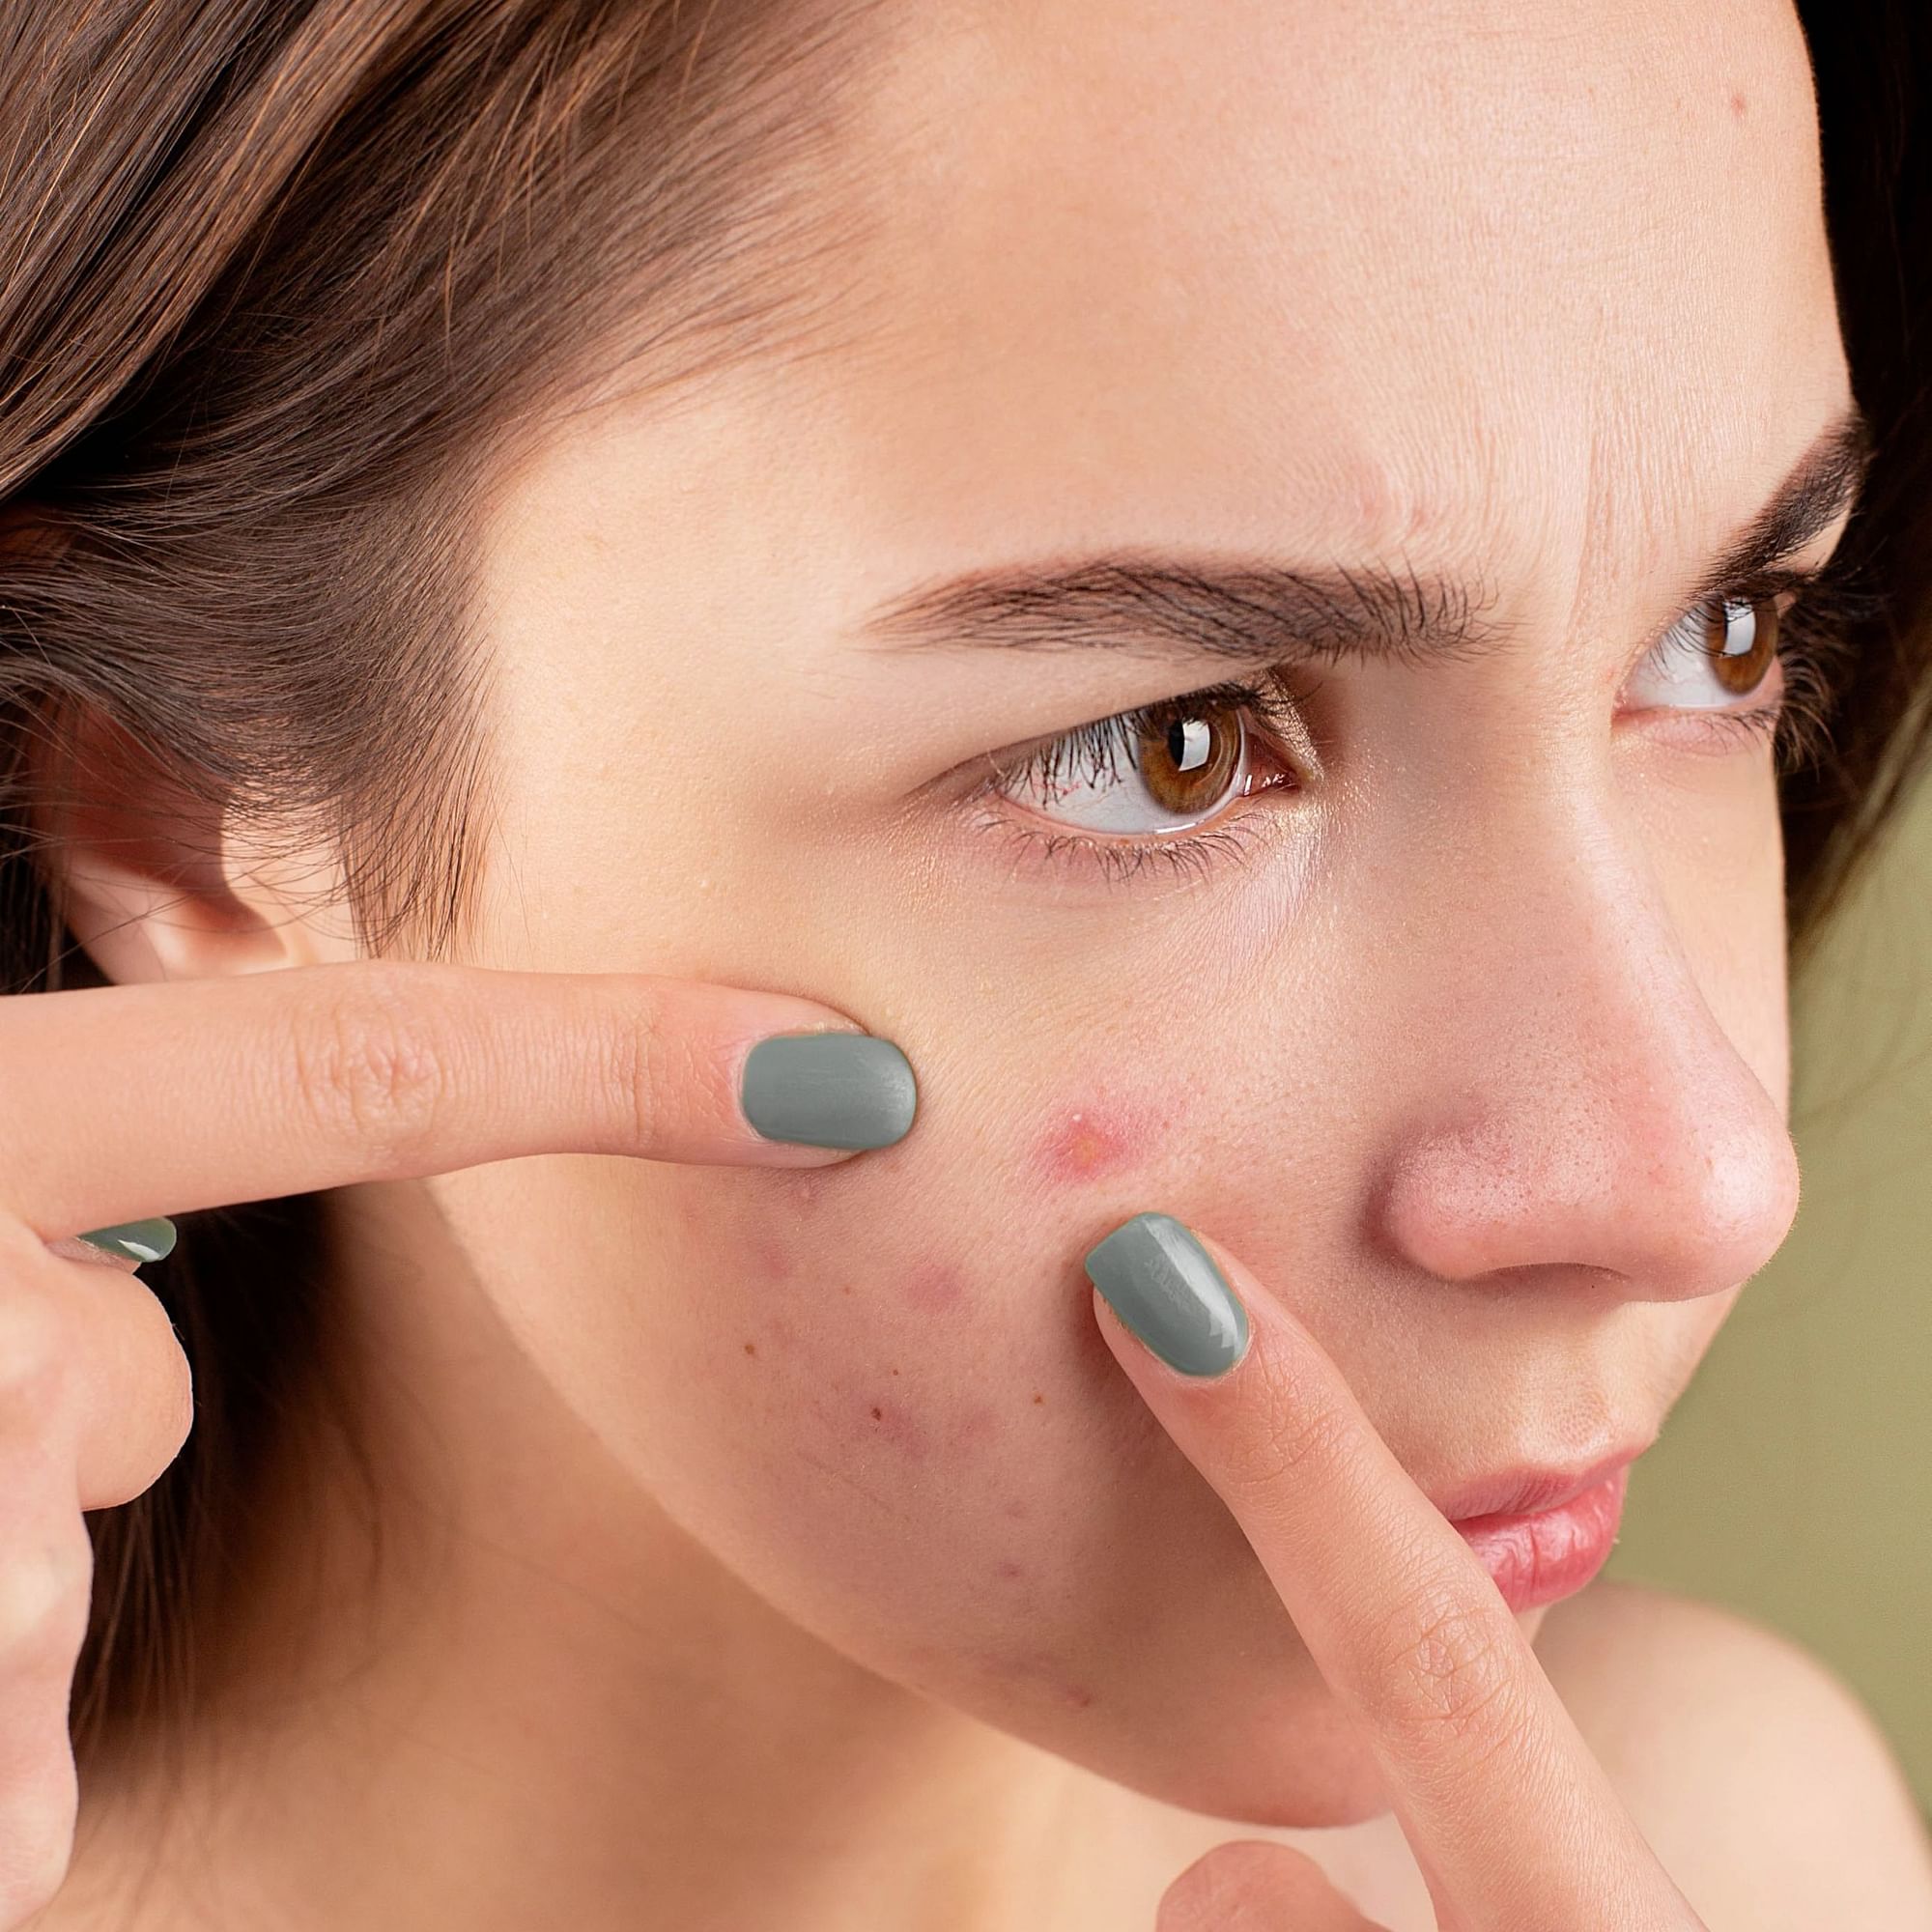 Emergency Beauty Fixes: Blemishes, Pimples and Zits